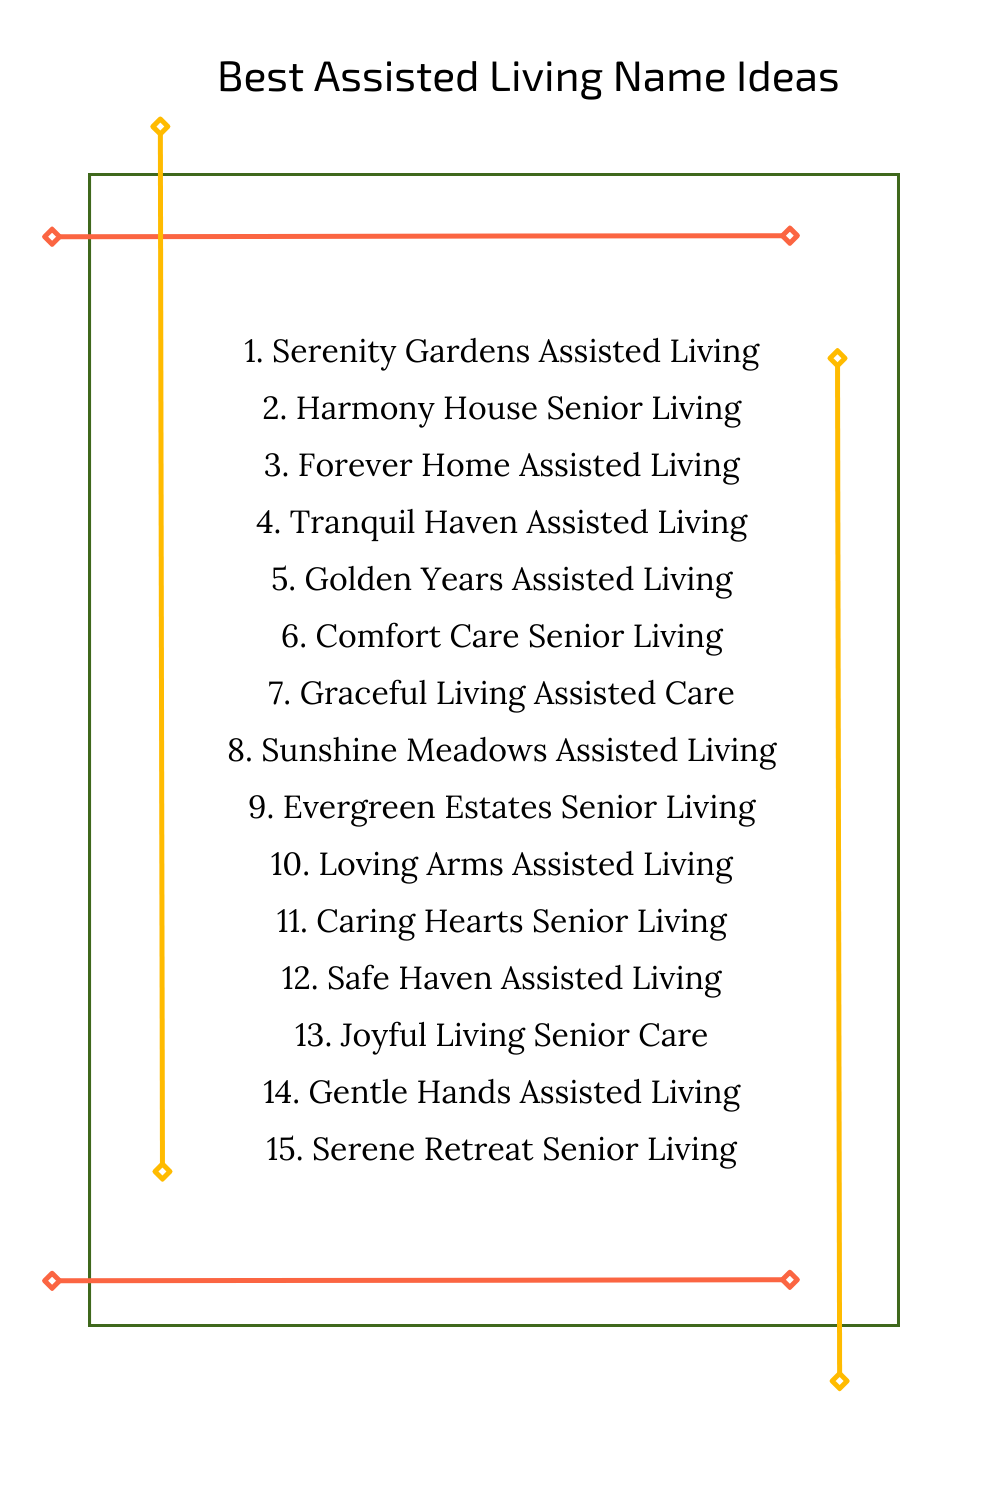 Best Assisted Living Name Ideas